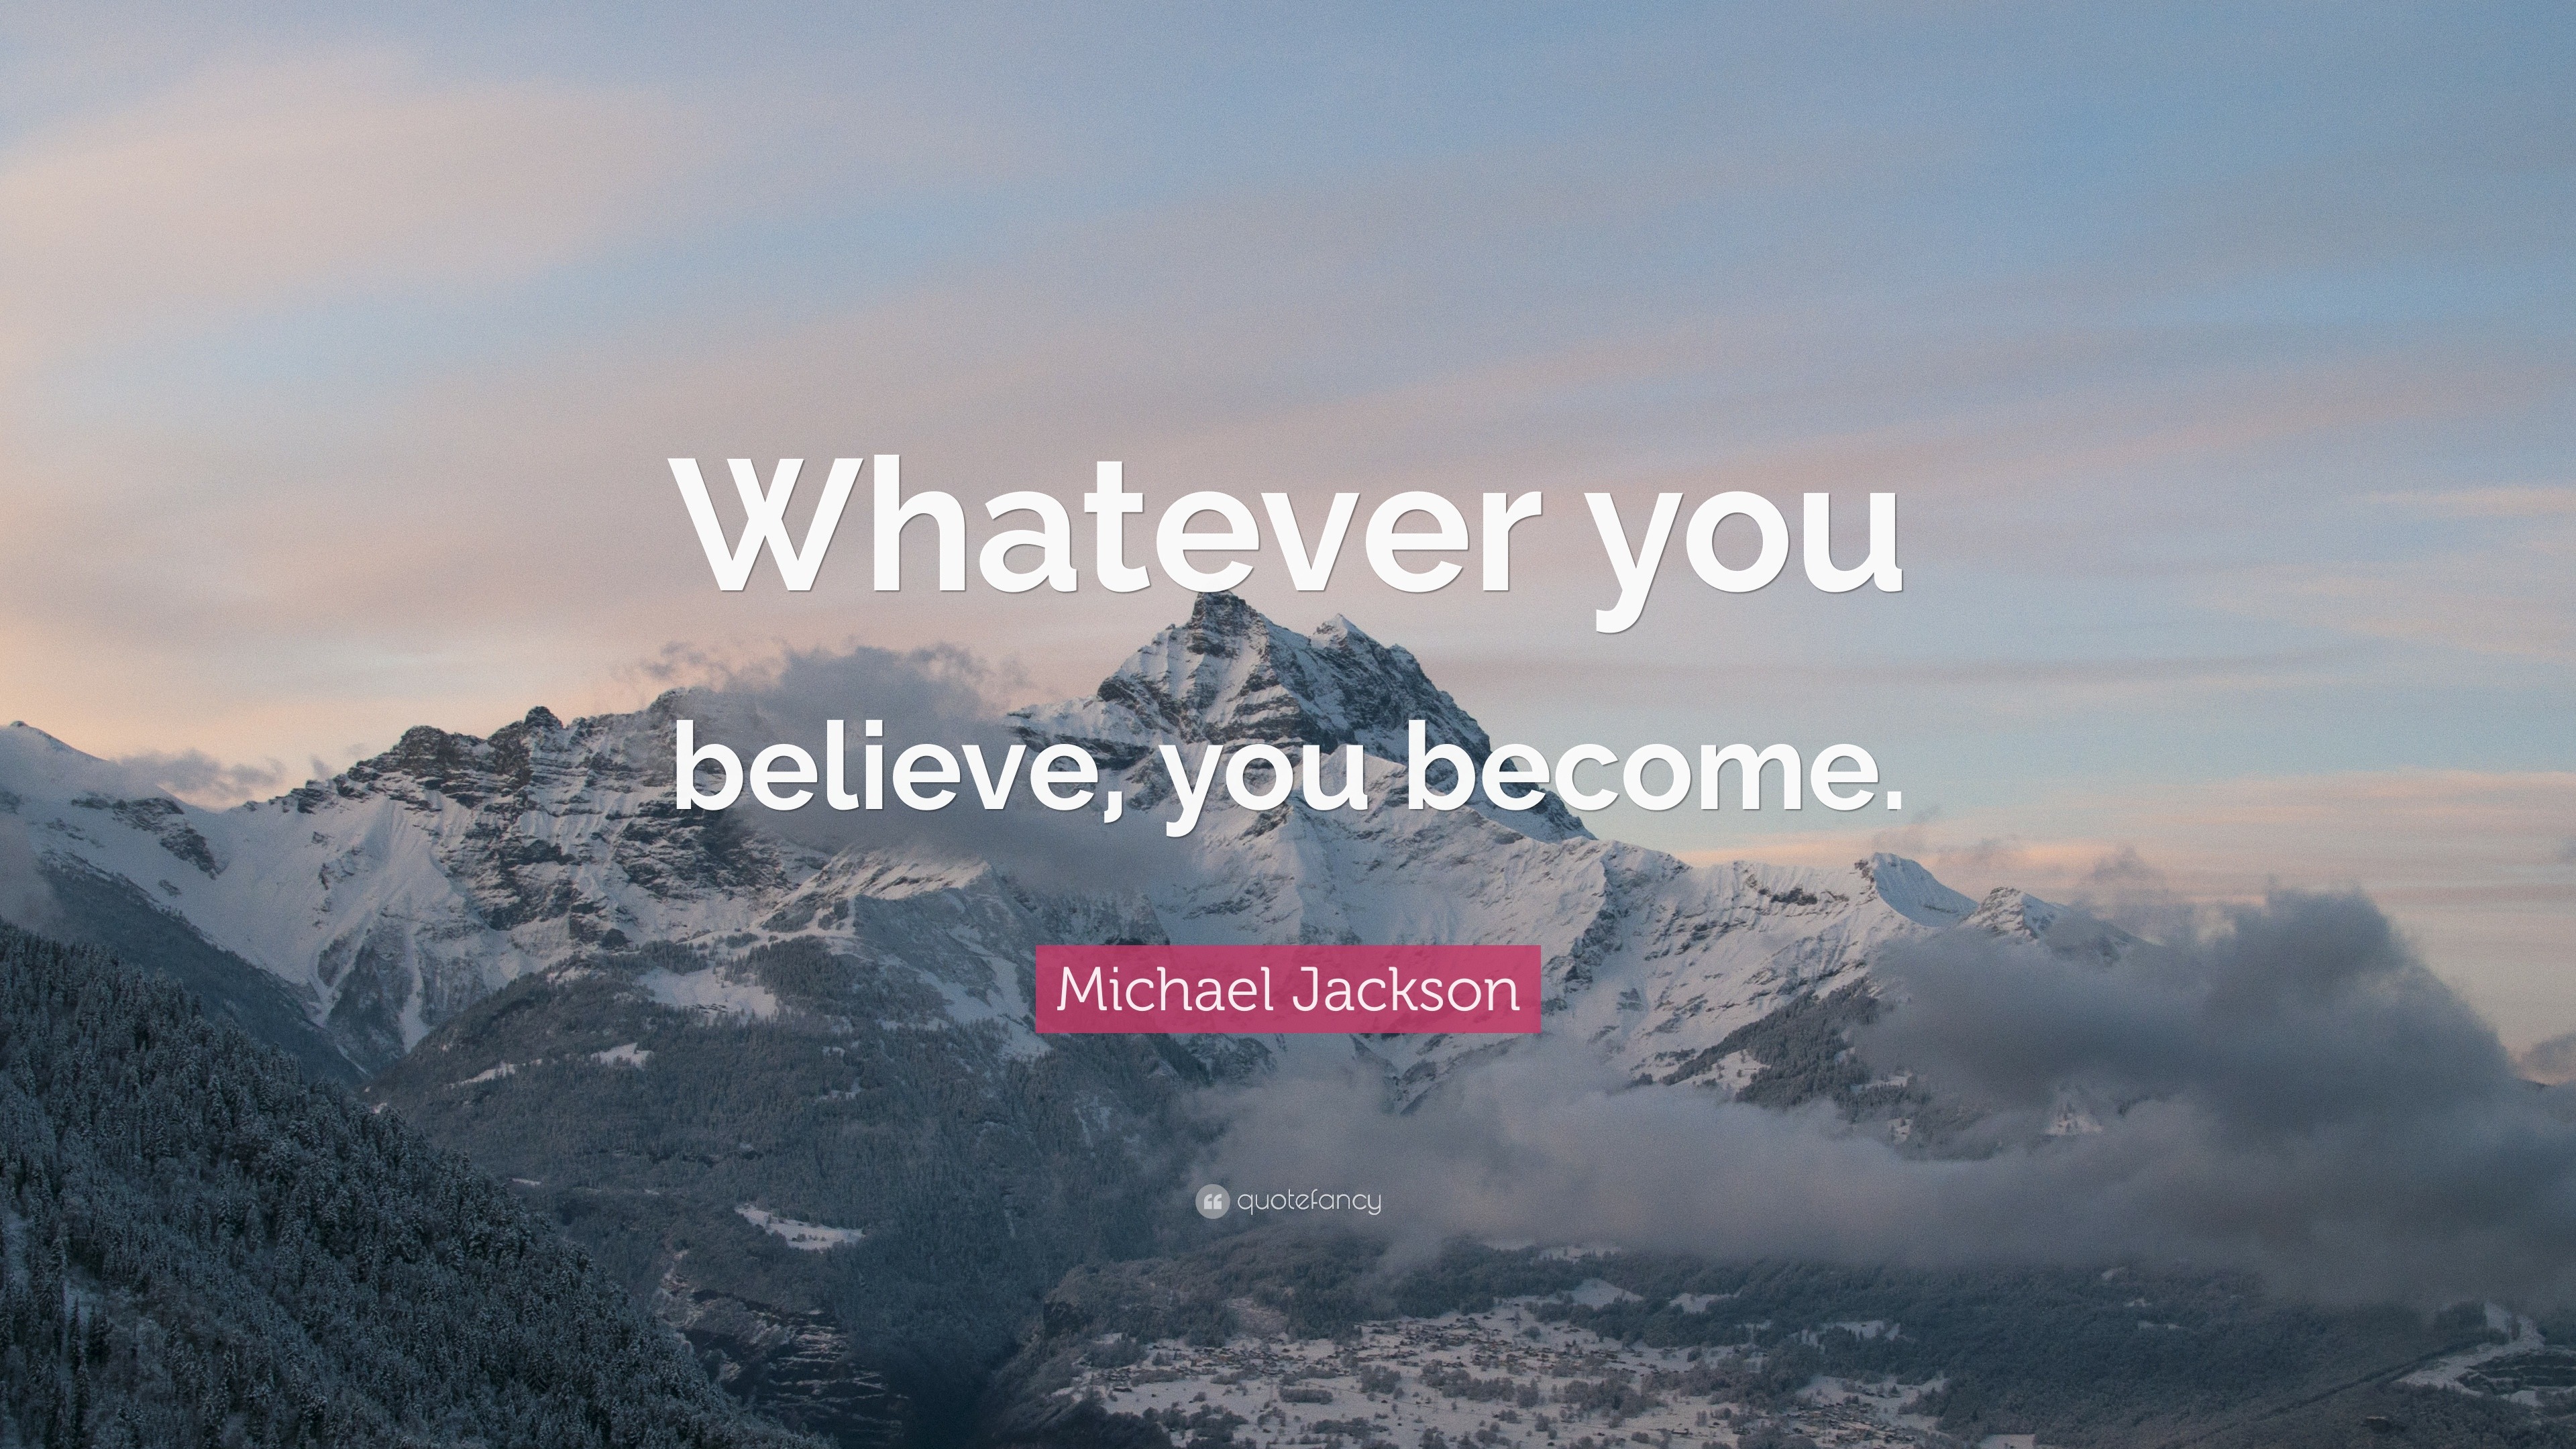 Michael Jackson Quote: “Whatever you believe, you become.”